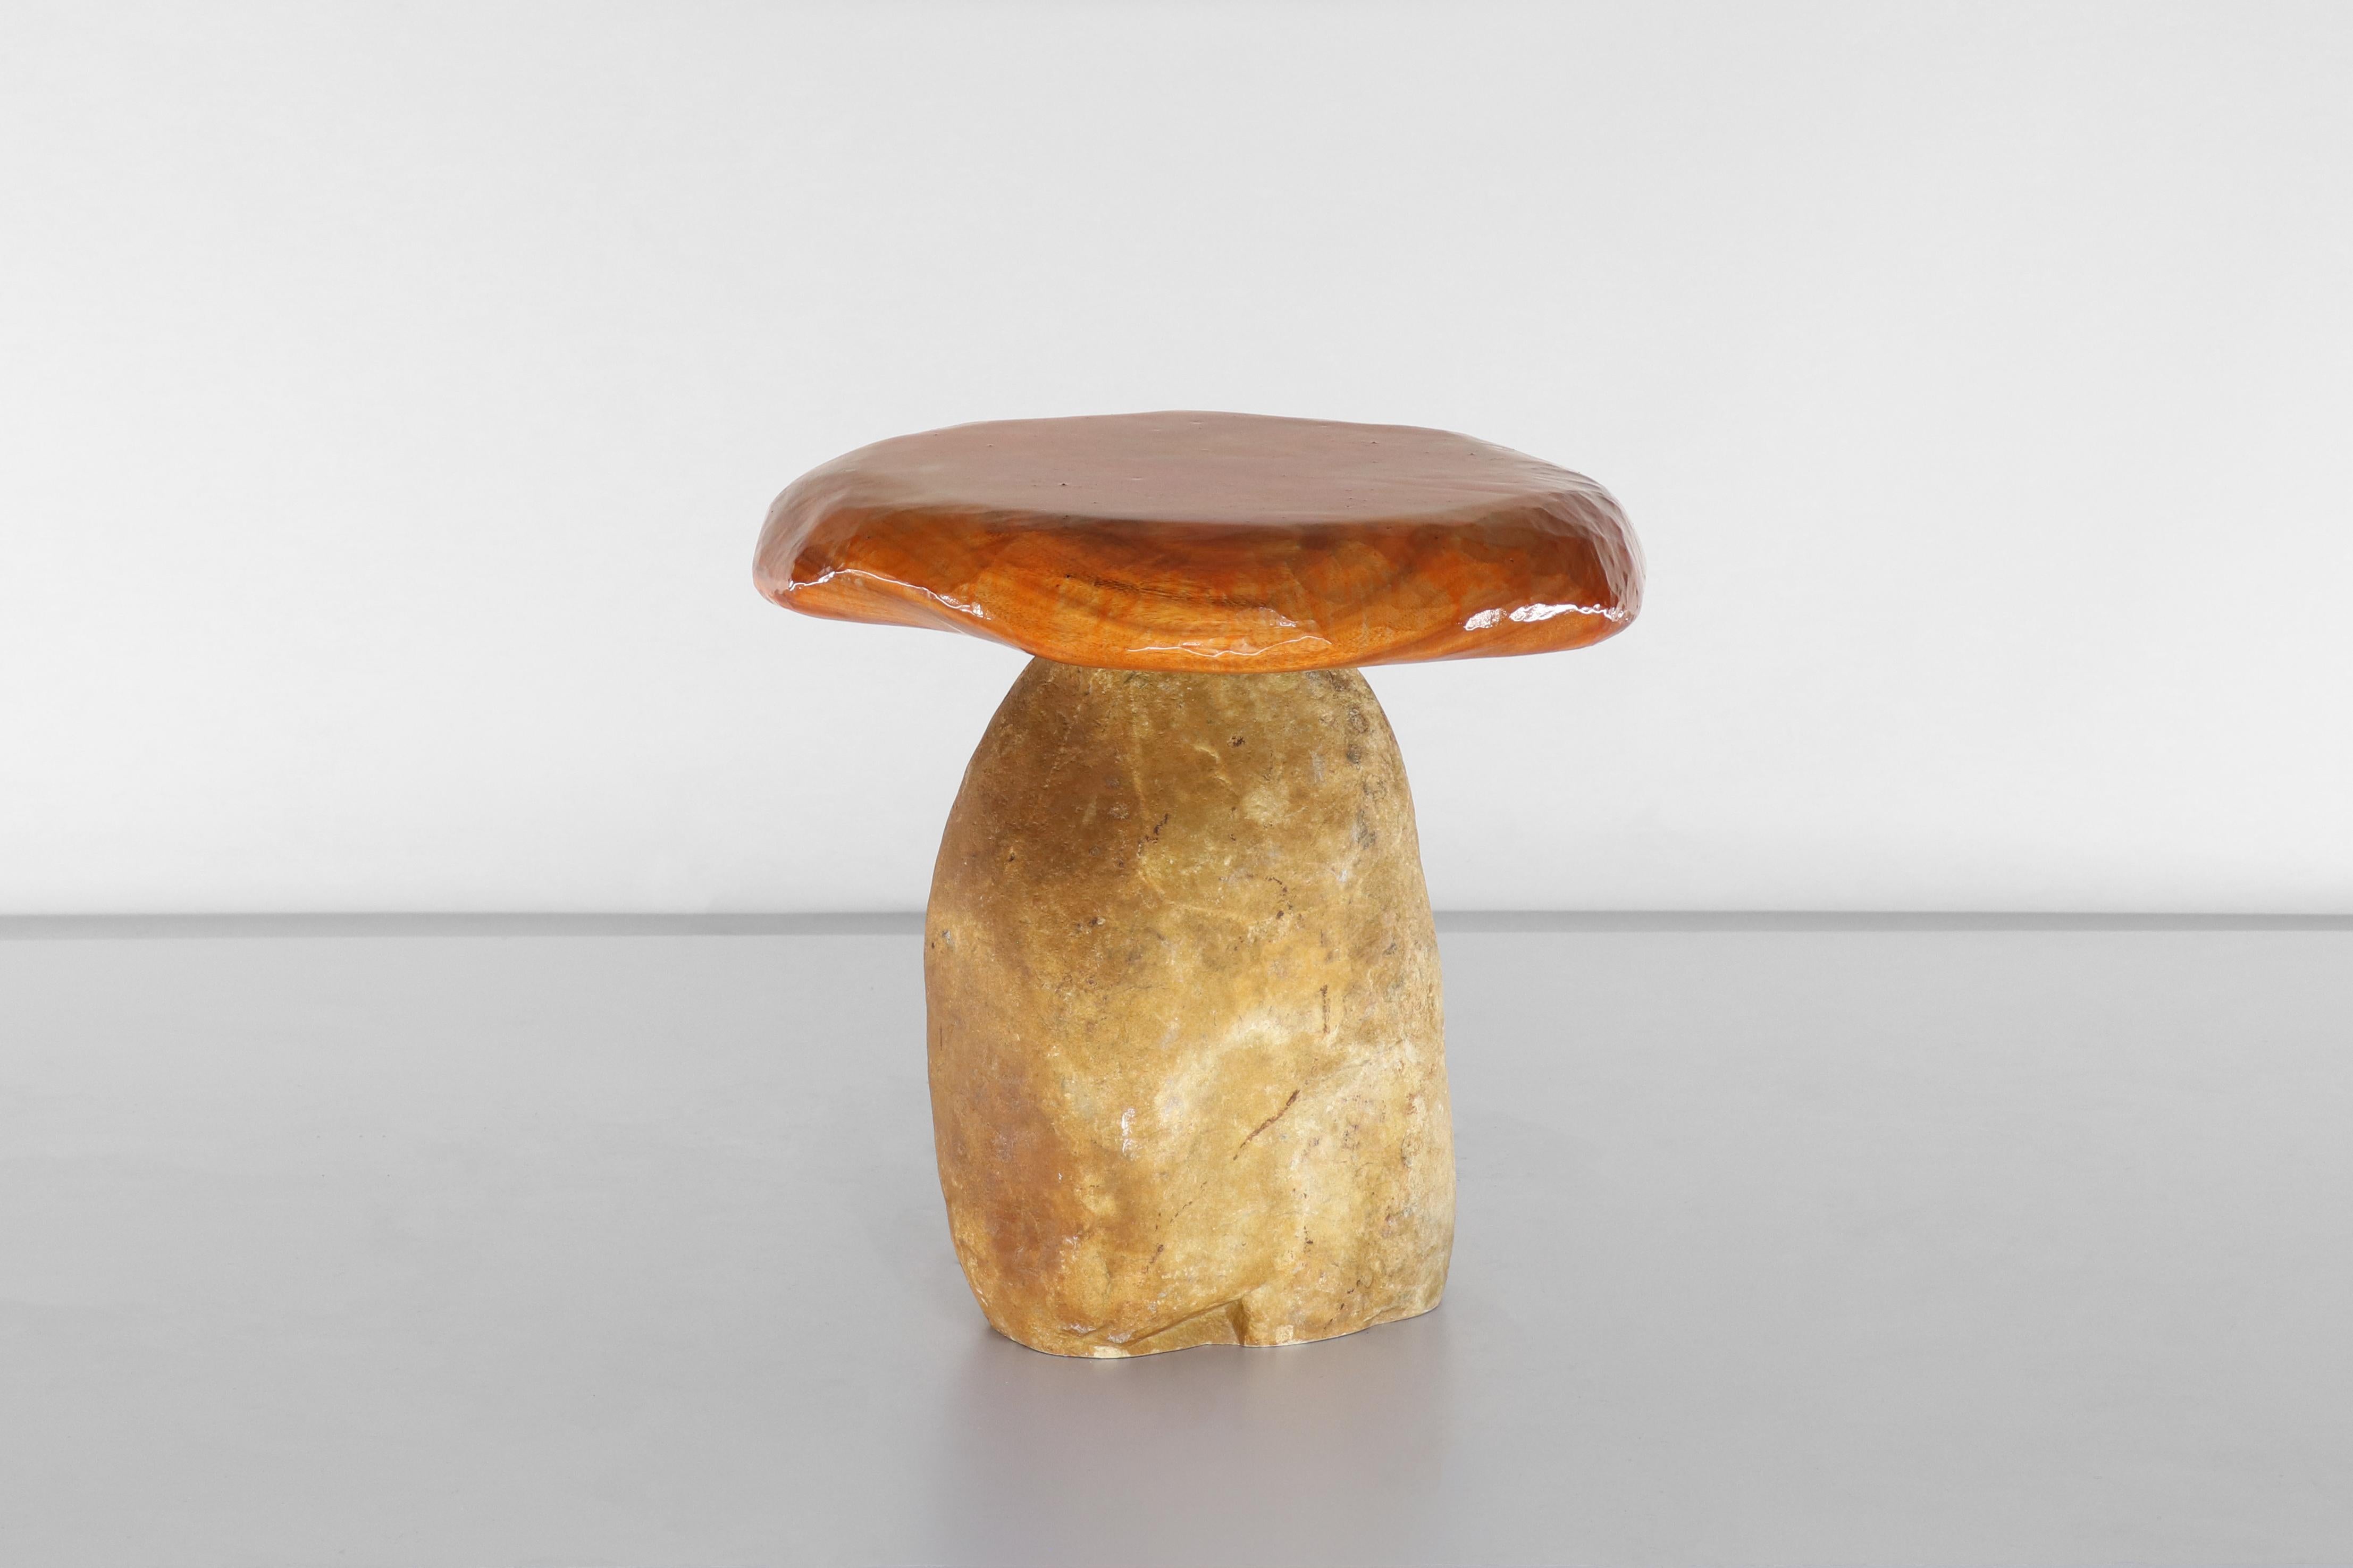 Natural Bolete Side Table by Henry D'ath
Dimensions: D 40 x W 45 x H 45 cm
Materials: Wood, Granite. 
Available finishes: Natural, Black ink. 


Henry d’ath is a New Zealand-born, Hong Kong-based artist and architect. 
Using predominantly salvaged